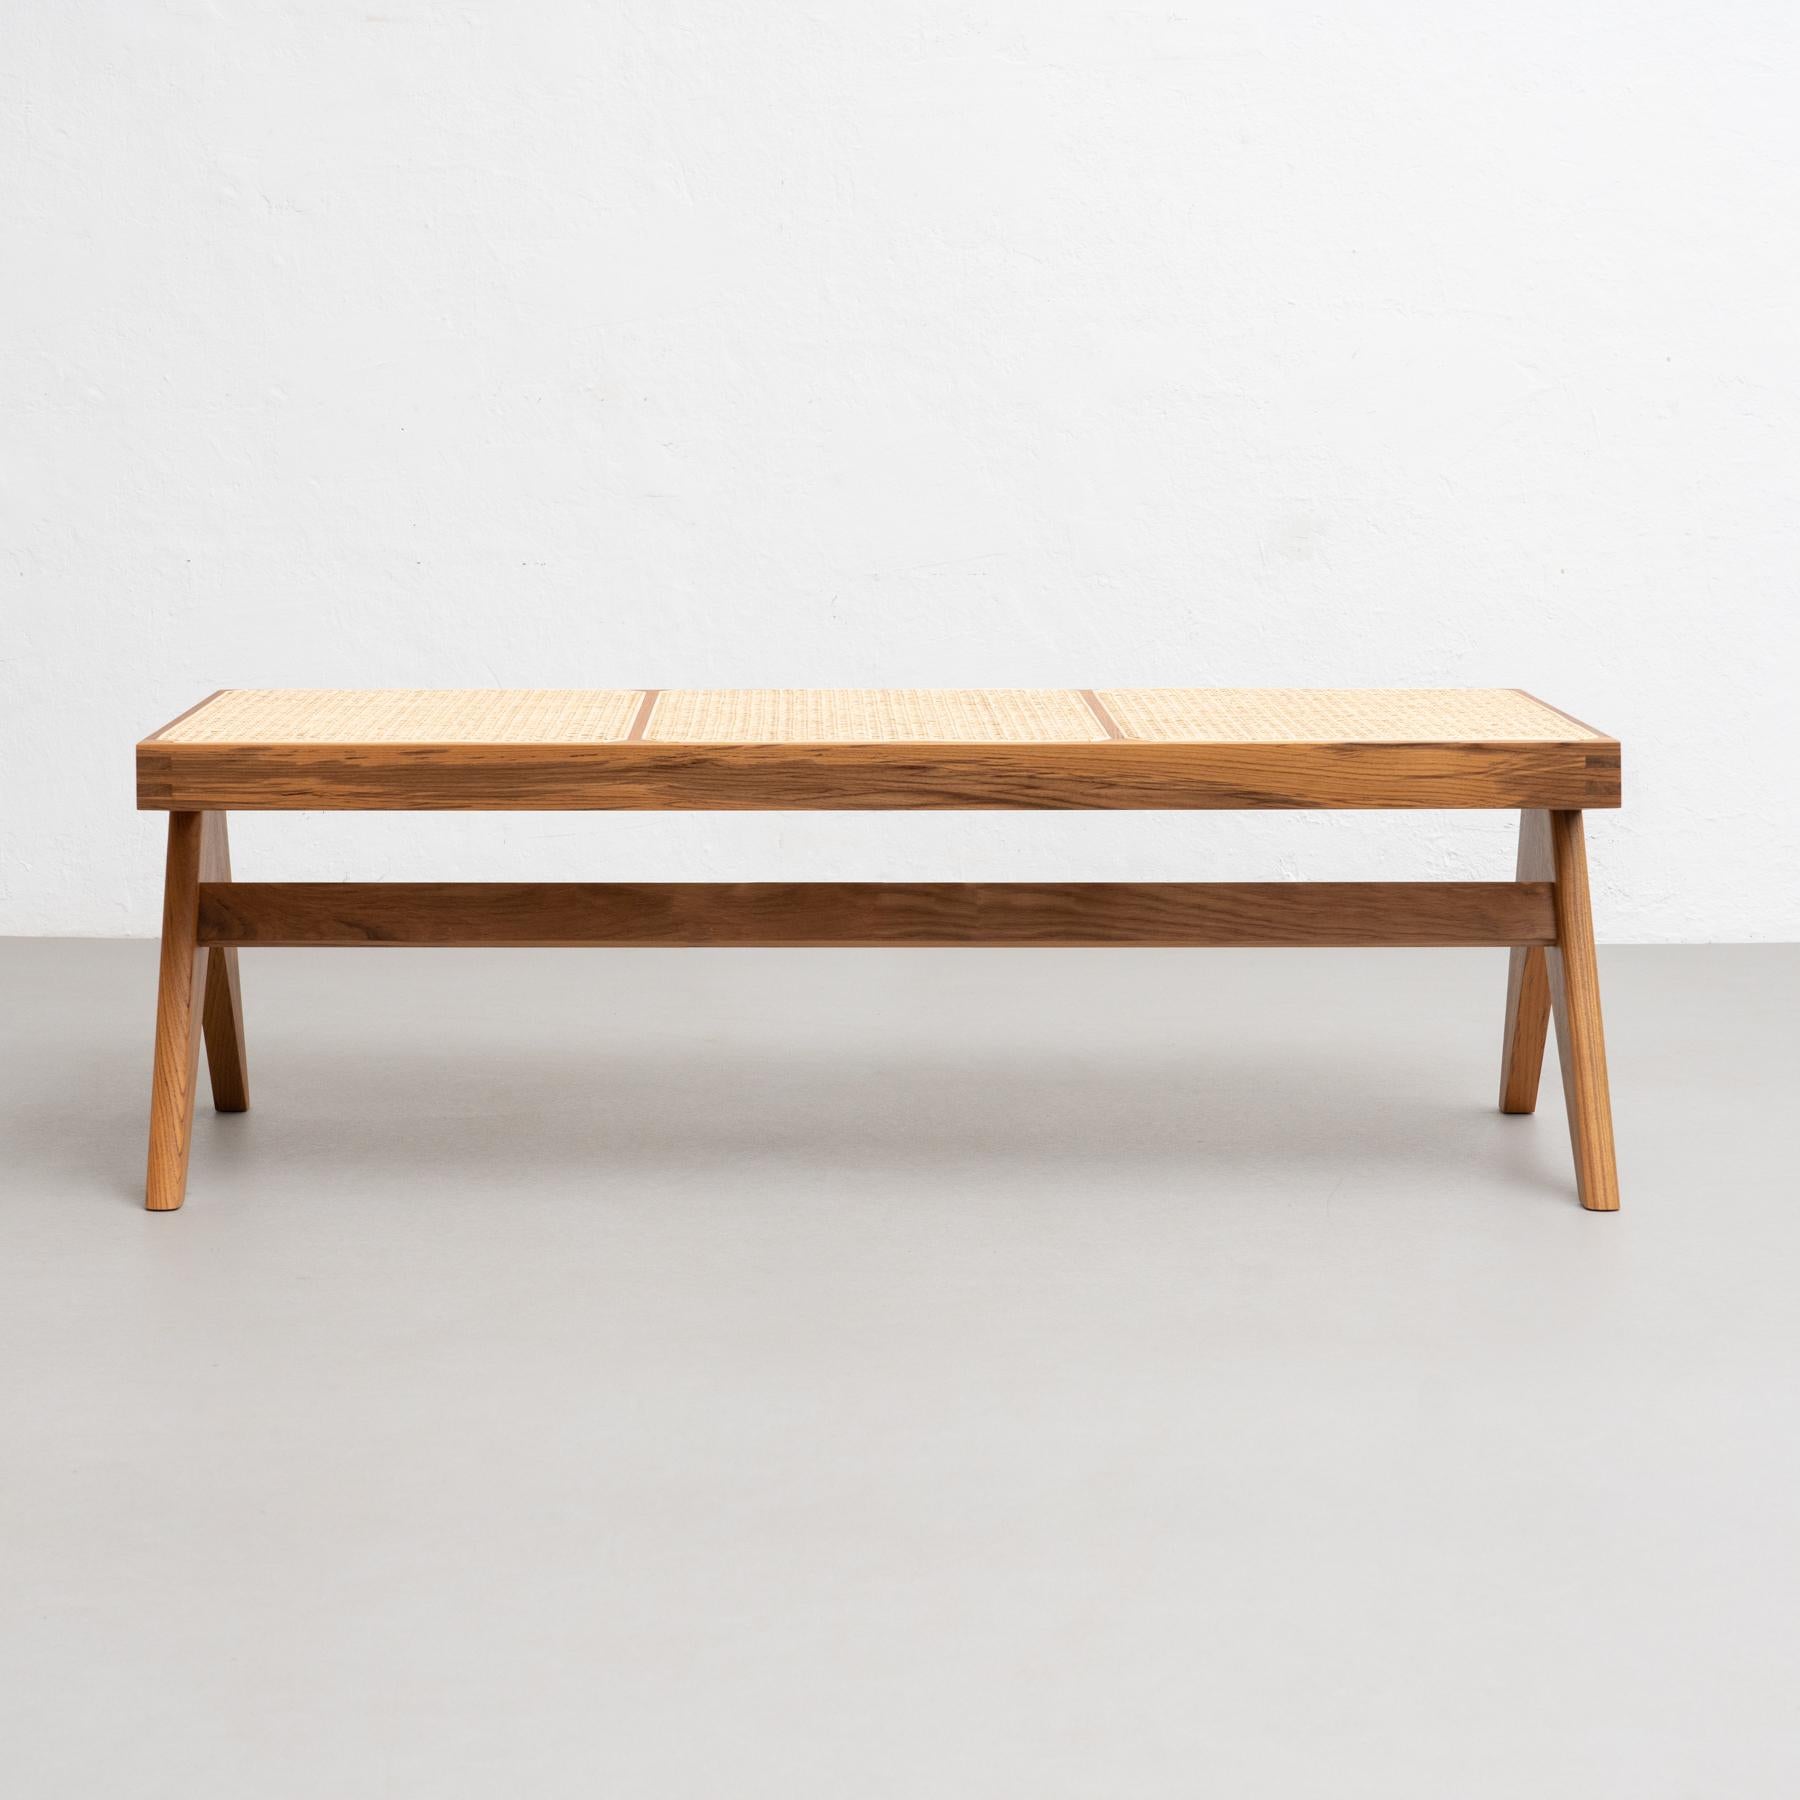 Pierre Jeanneret 057 Civil Bench, Wood and Woven Viennese Cane For Sale 1